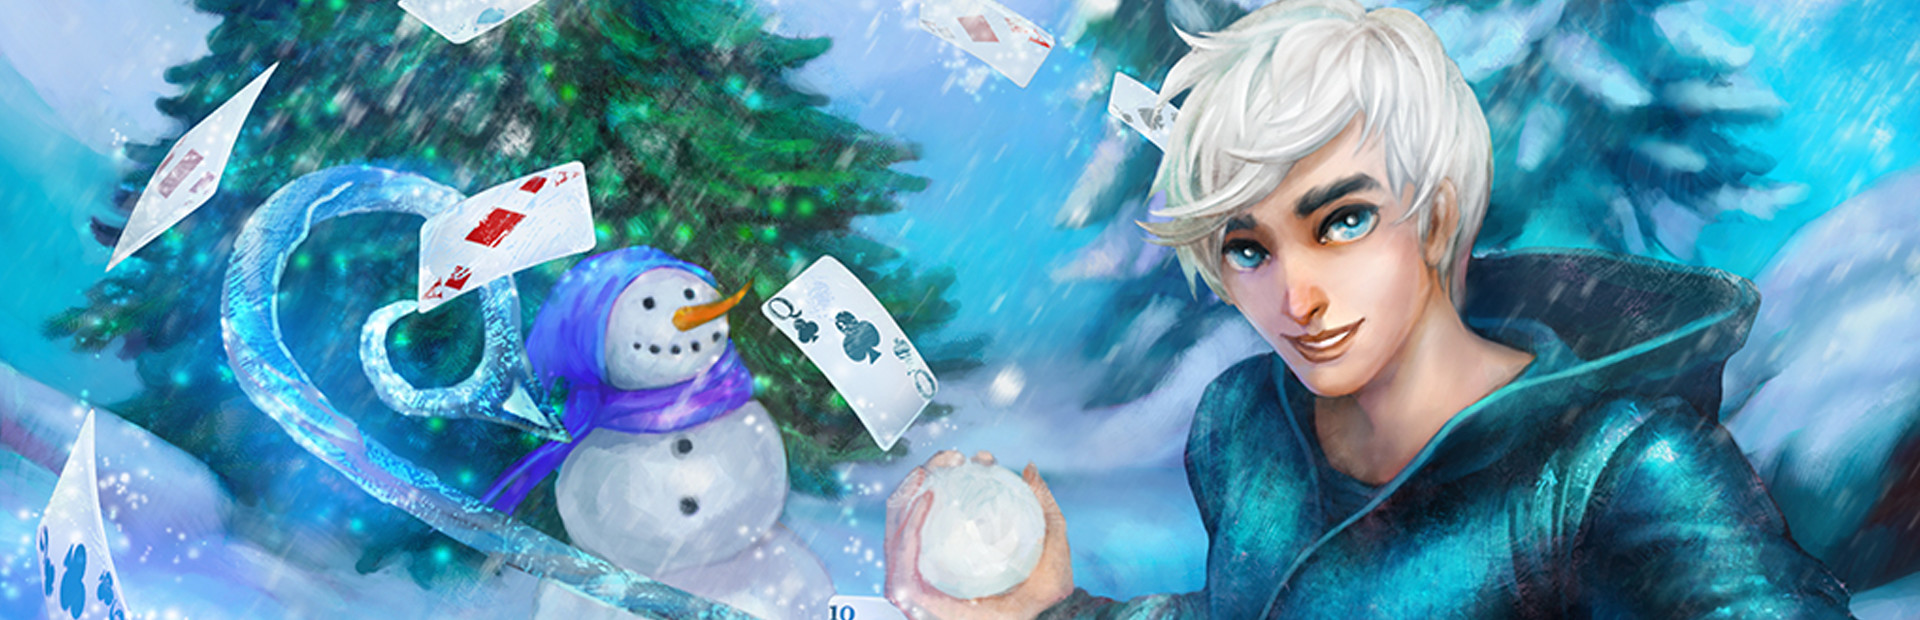 Solitaire Jack Frost Winter Adventures 2 cover image